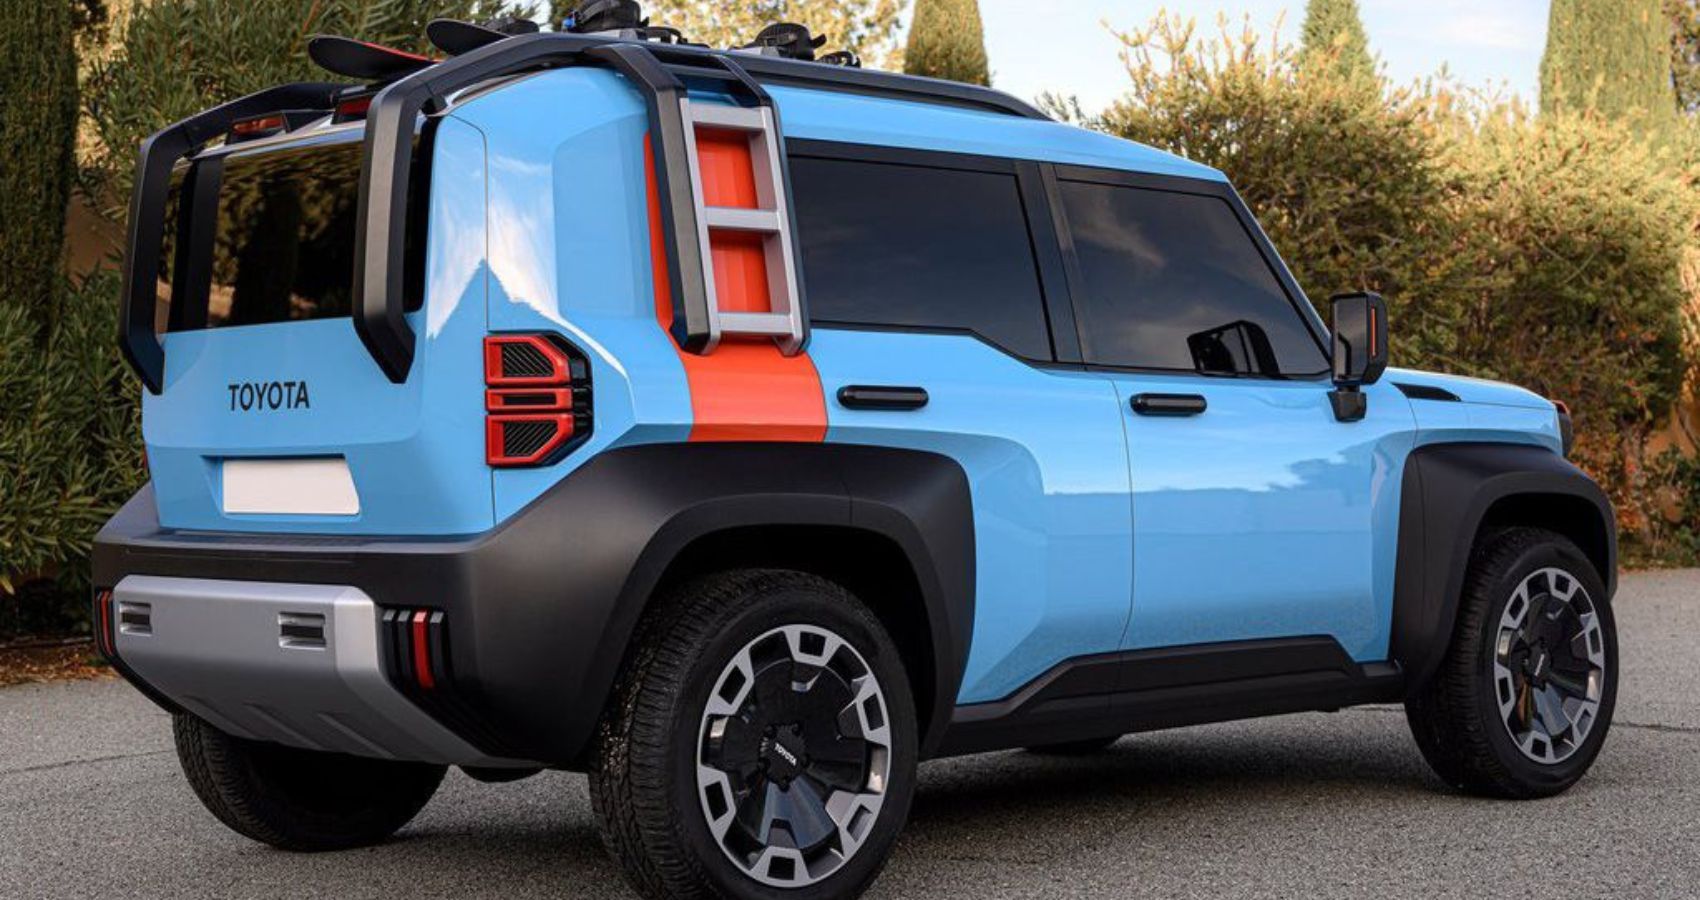 Why We Can't Wait For The 2024 Toyota Compact Cruiser Baby Electric FJ